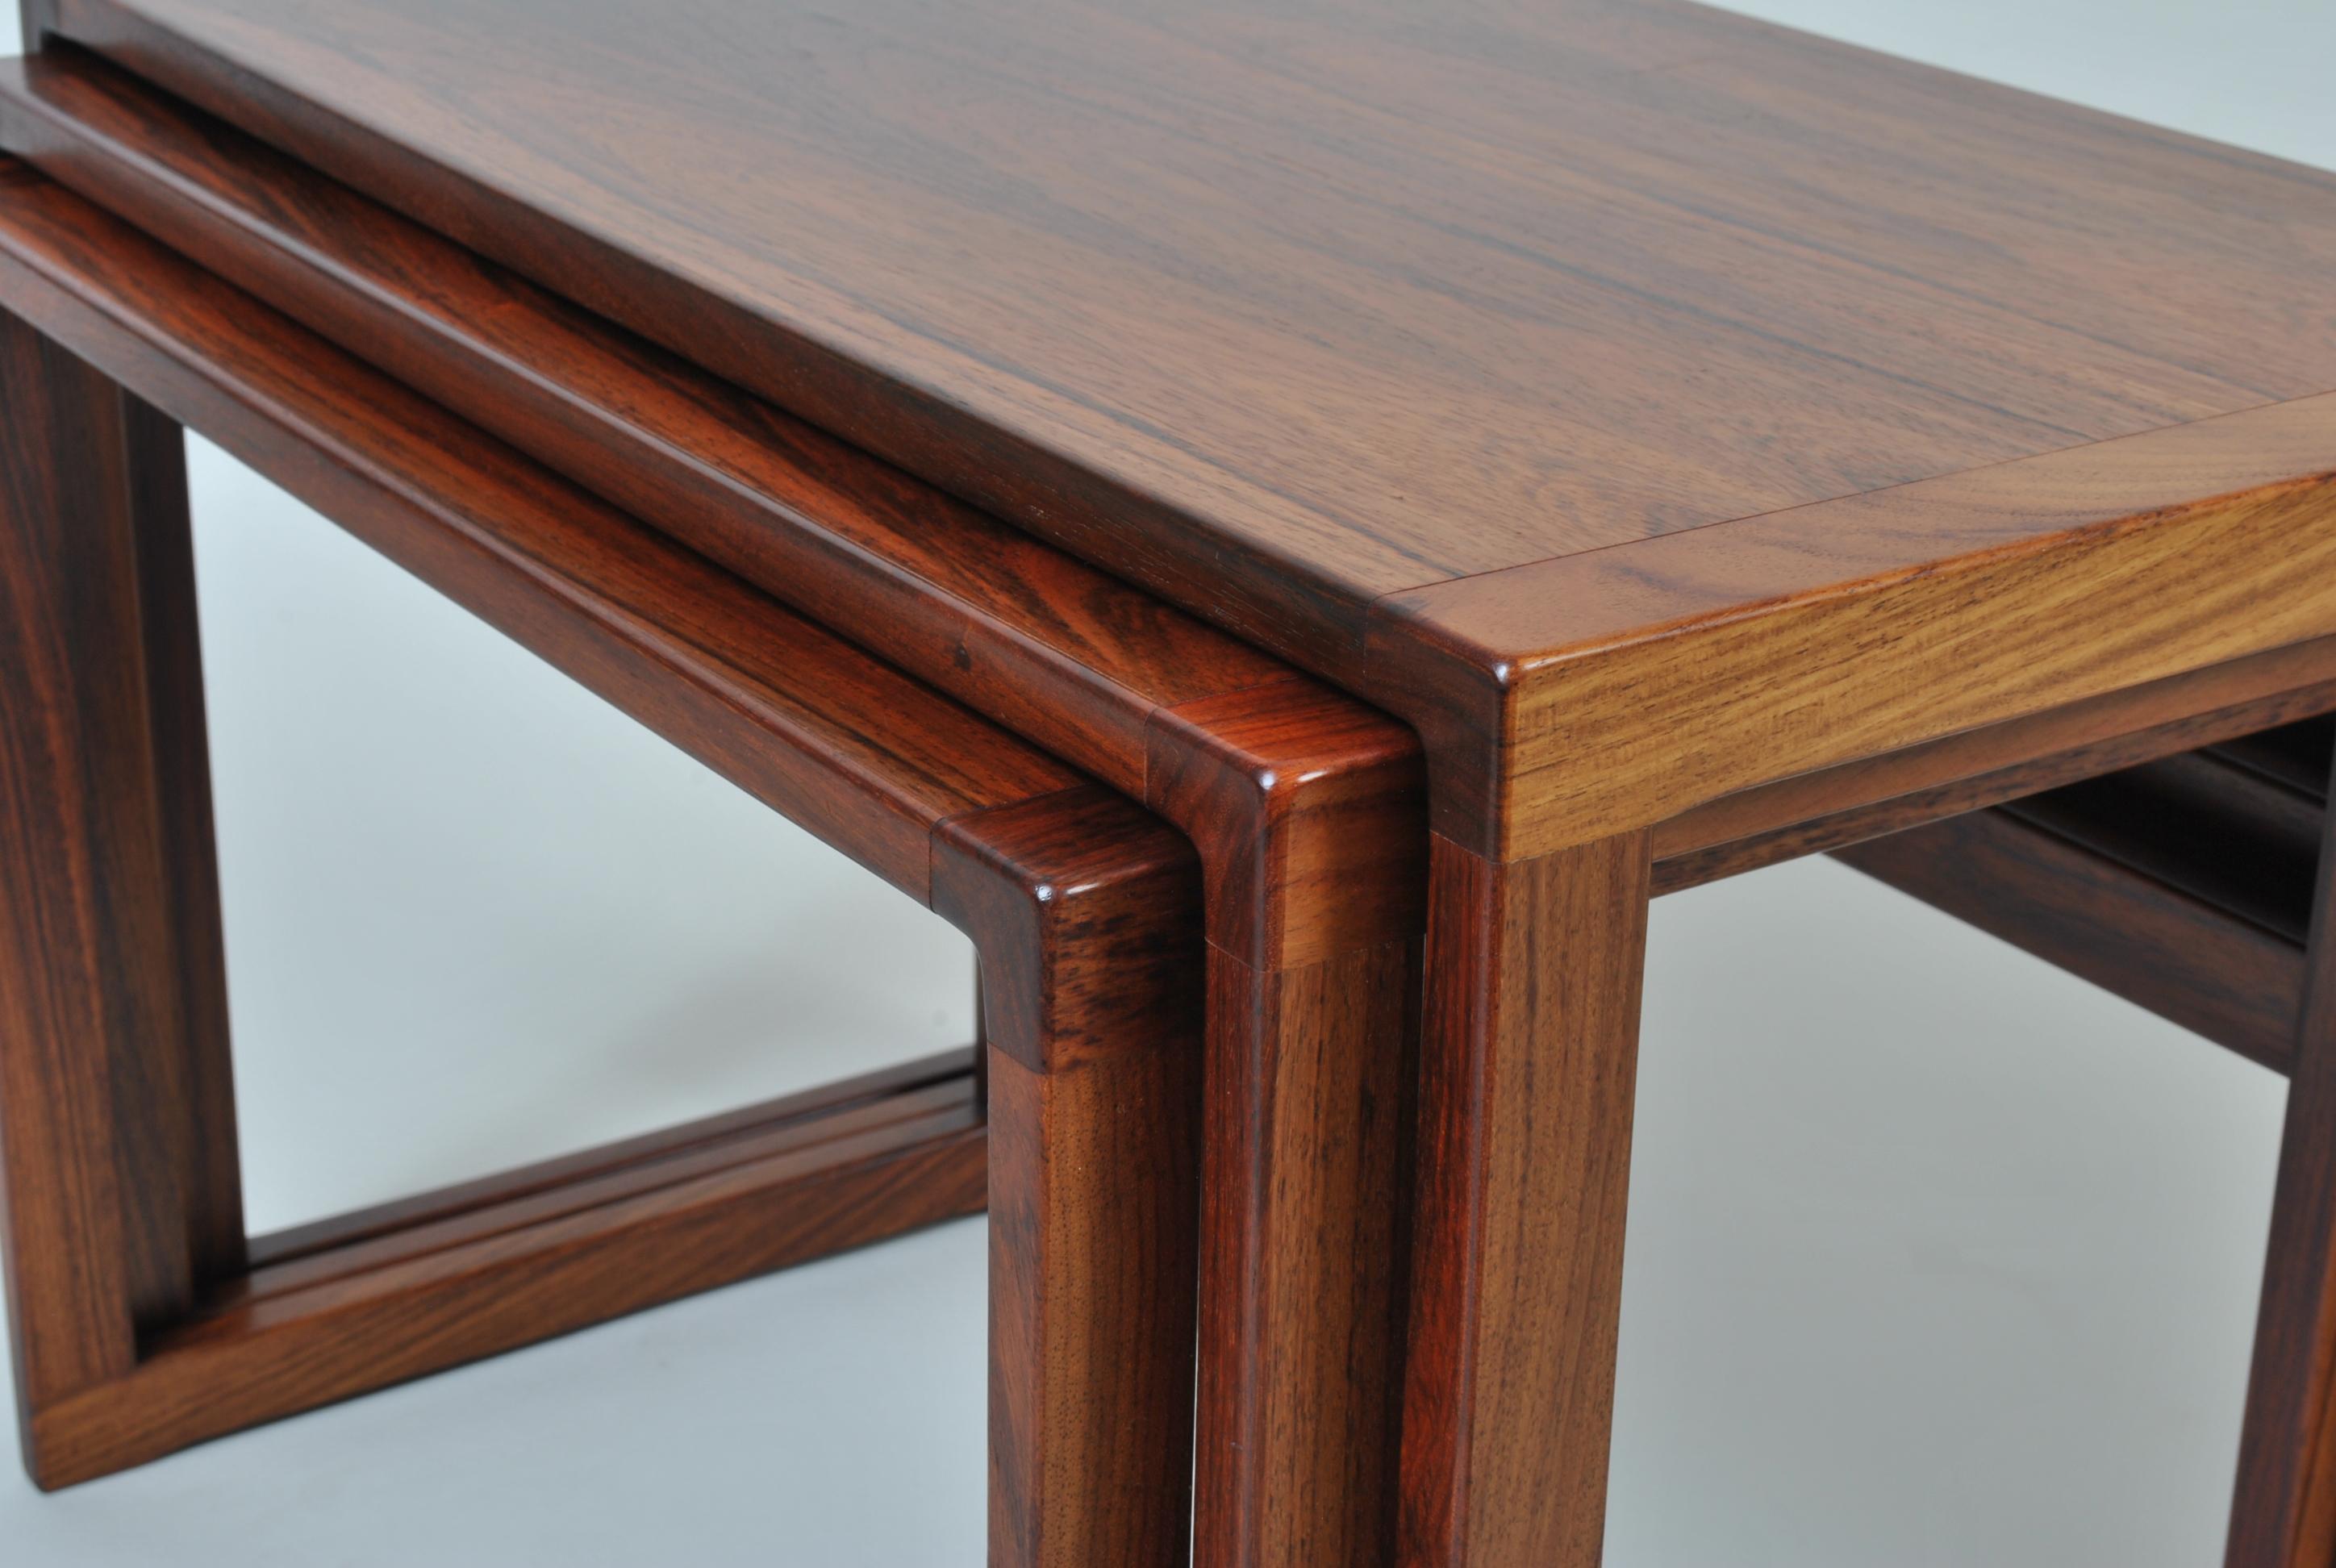 A set of rosewood nesting tables by the ever popular Kai Kristiansen. Designed by Kai Kristiansen - Produced by Vildbjerg Mobelfabrik, Denmark circa 1960. Superb modernist design and very practical.
  